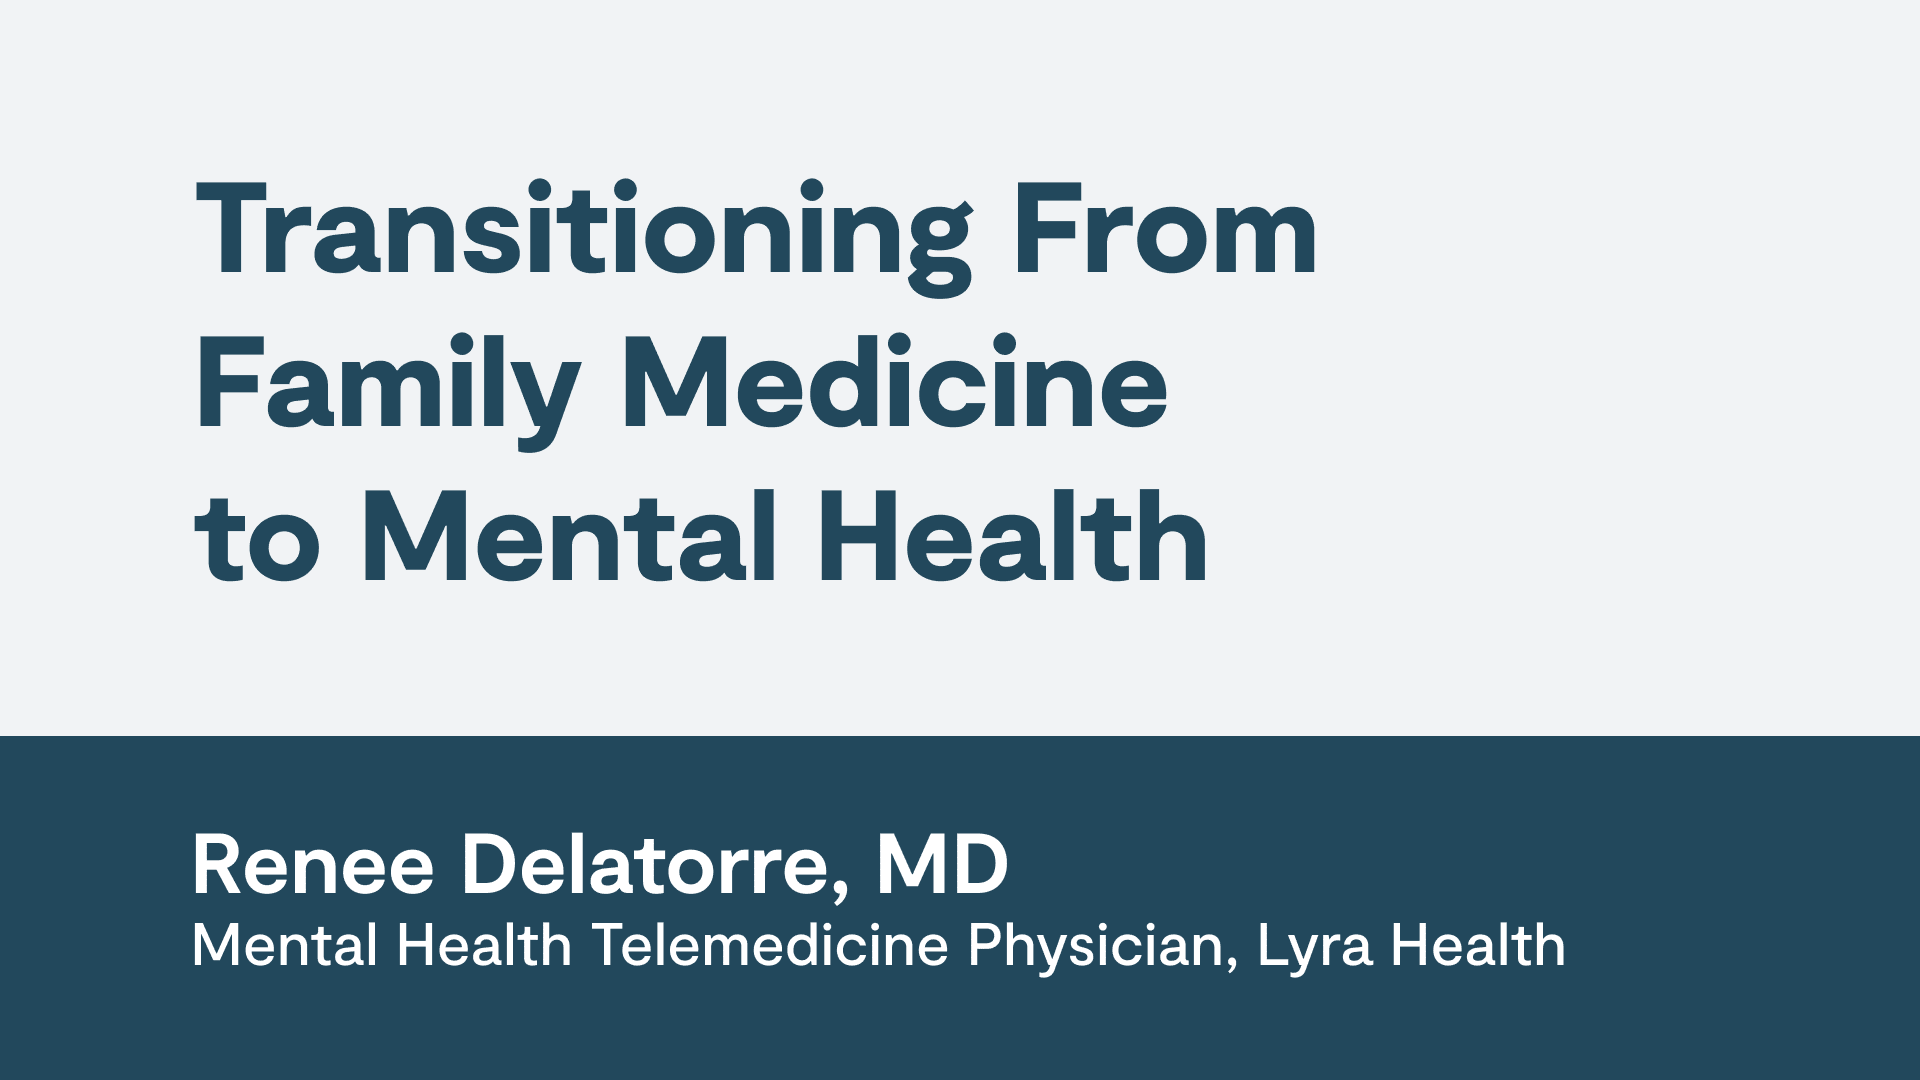 Transitioning From Family Medicine to Mental Health